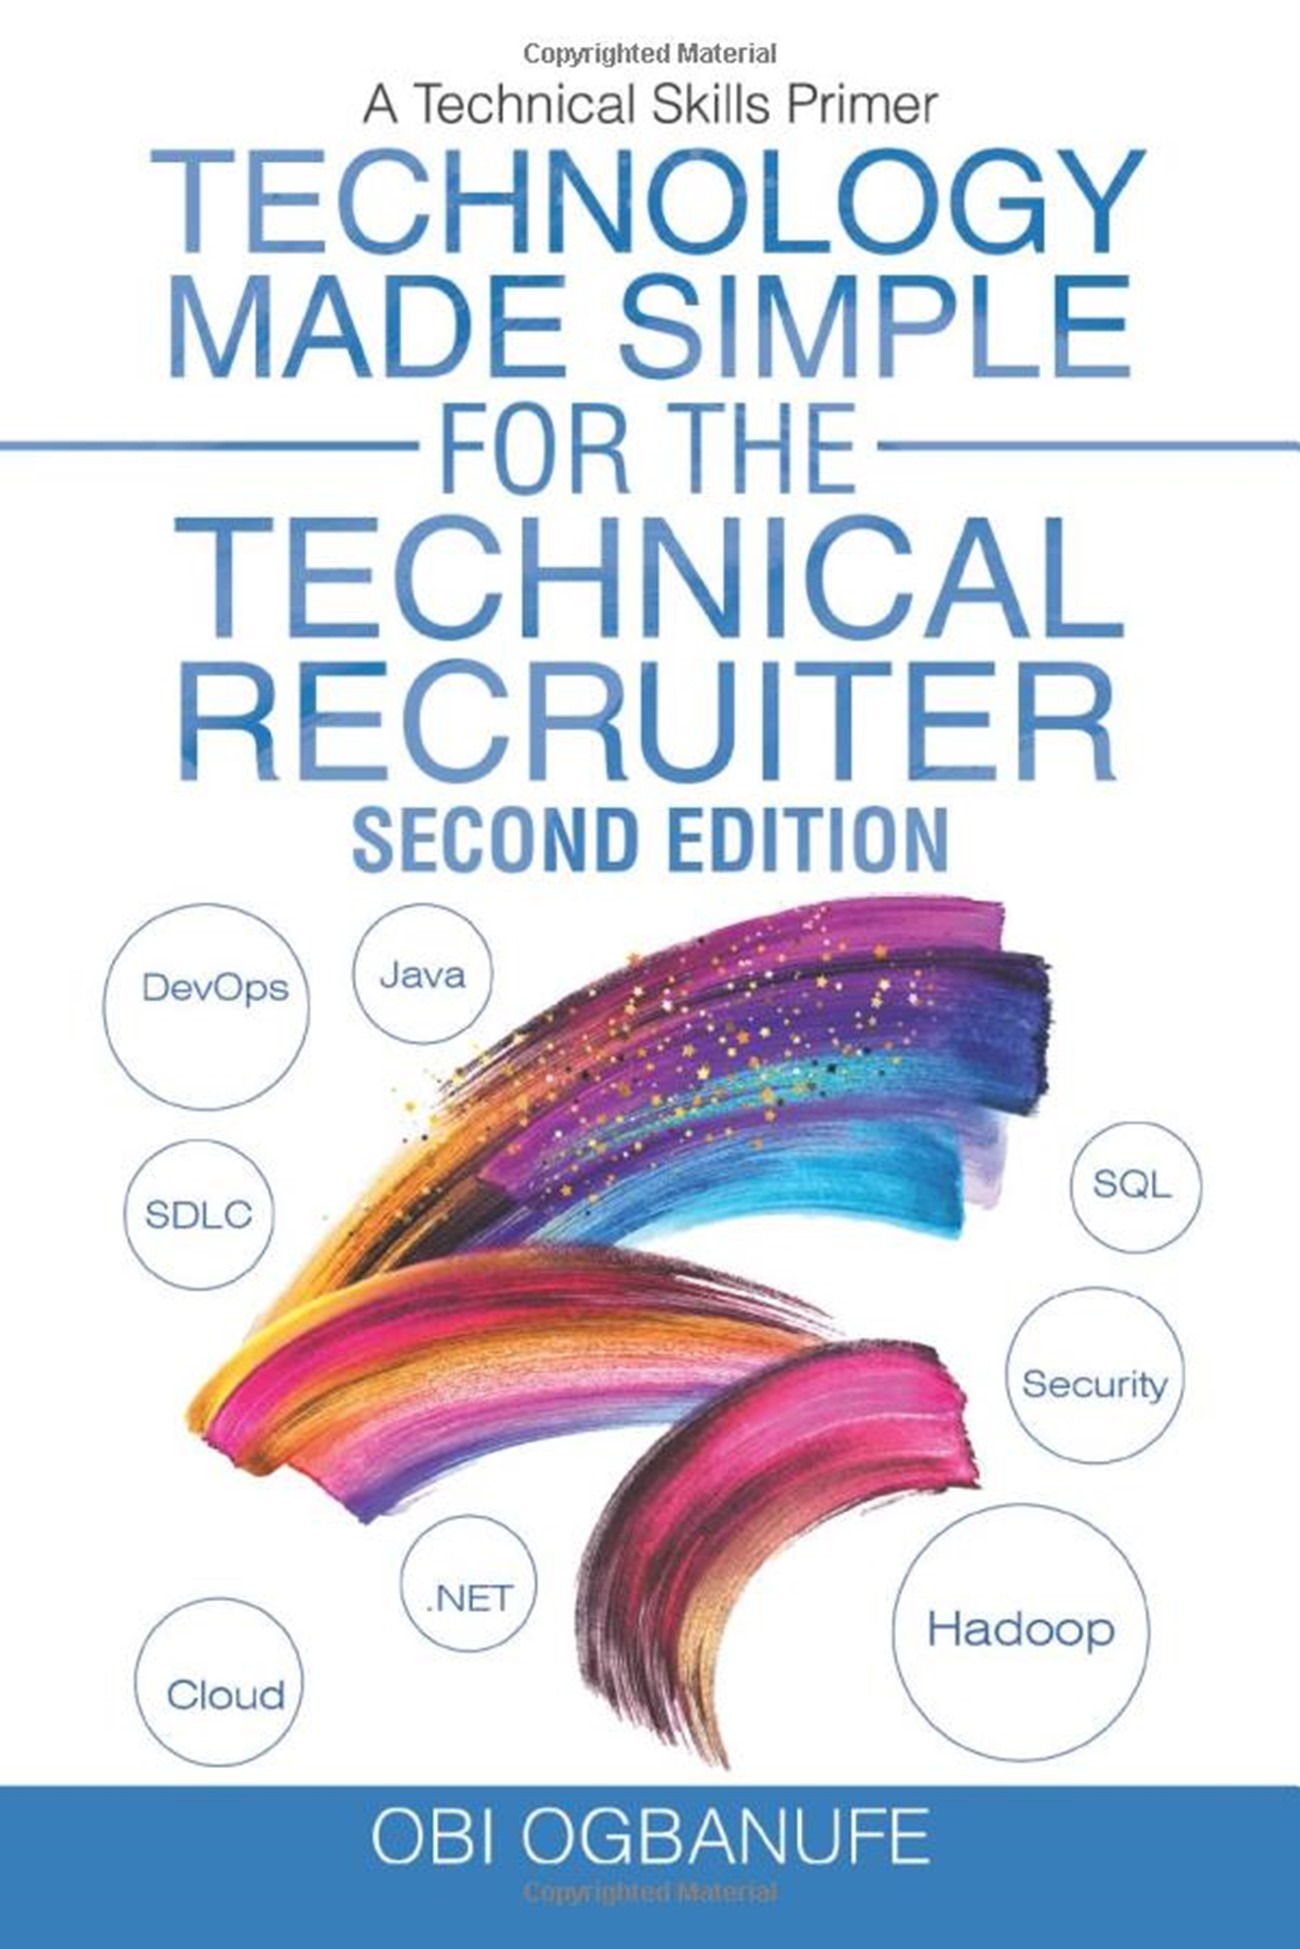 Technology made simple book